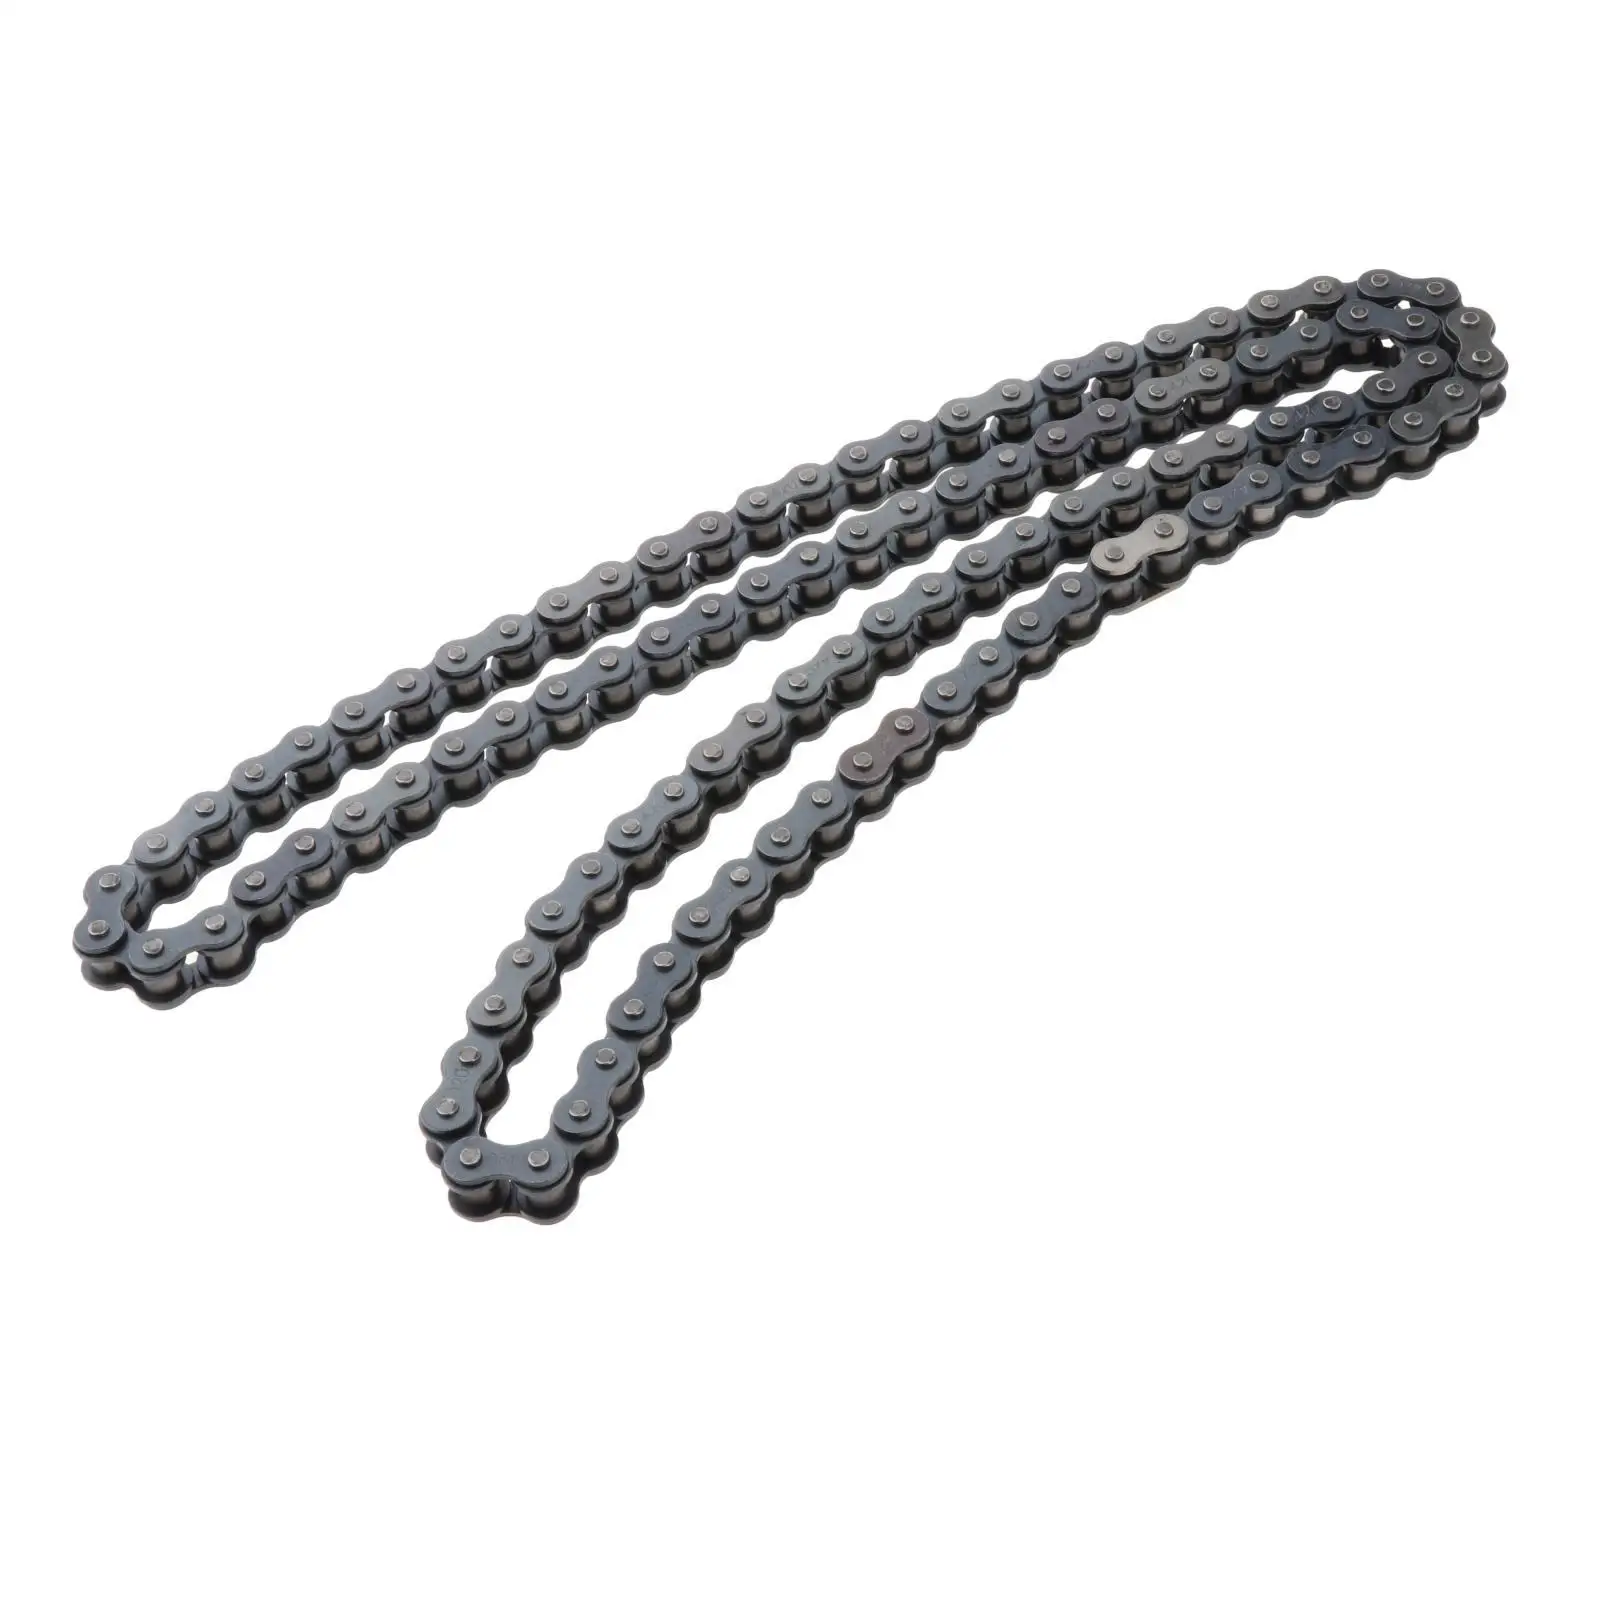 420 Motorcycle Chain 50-110Cc Roller Motorcycle Chain Fits for Dirt